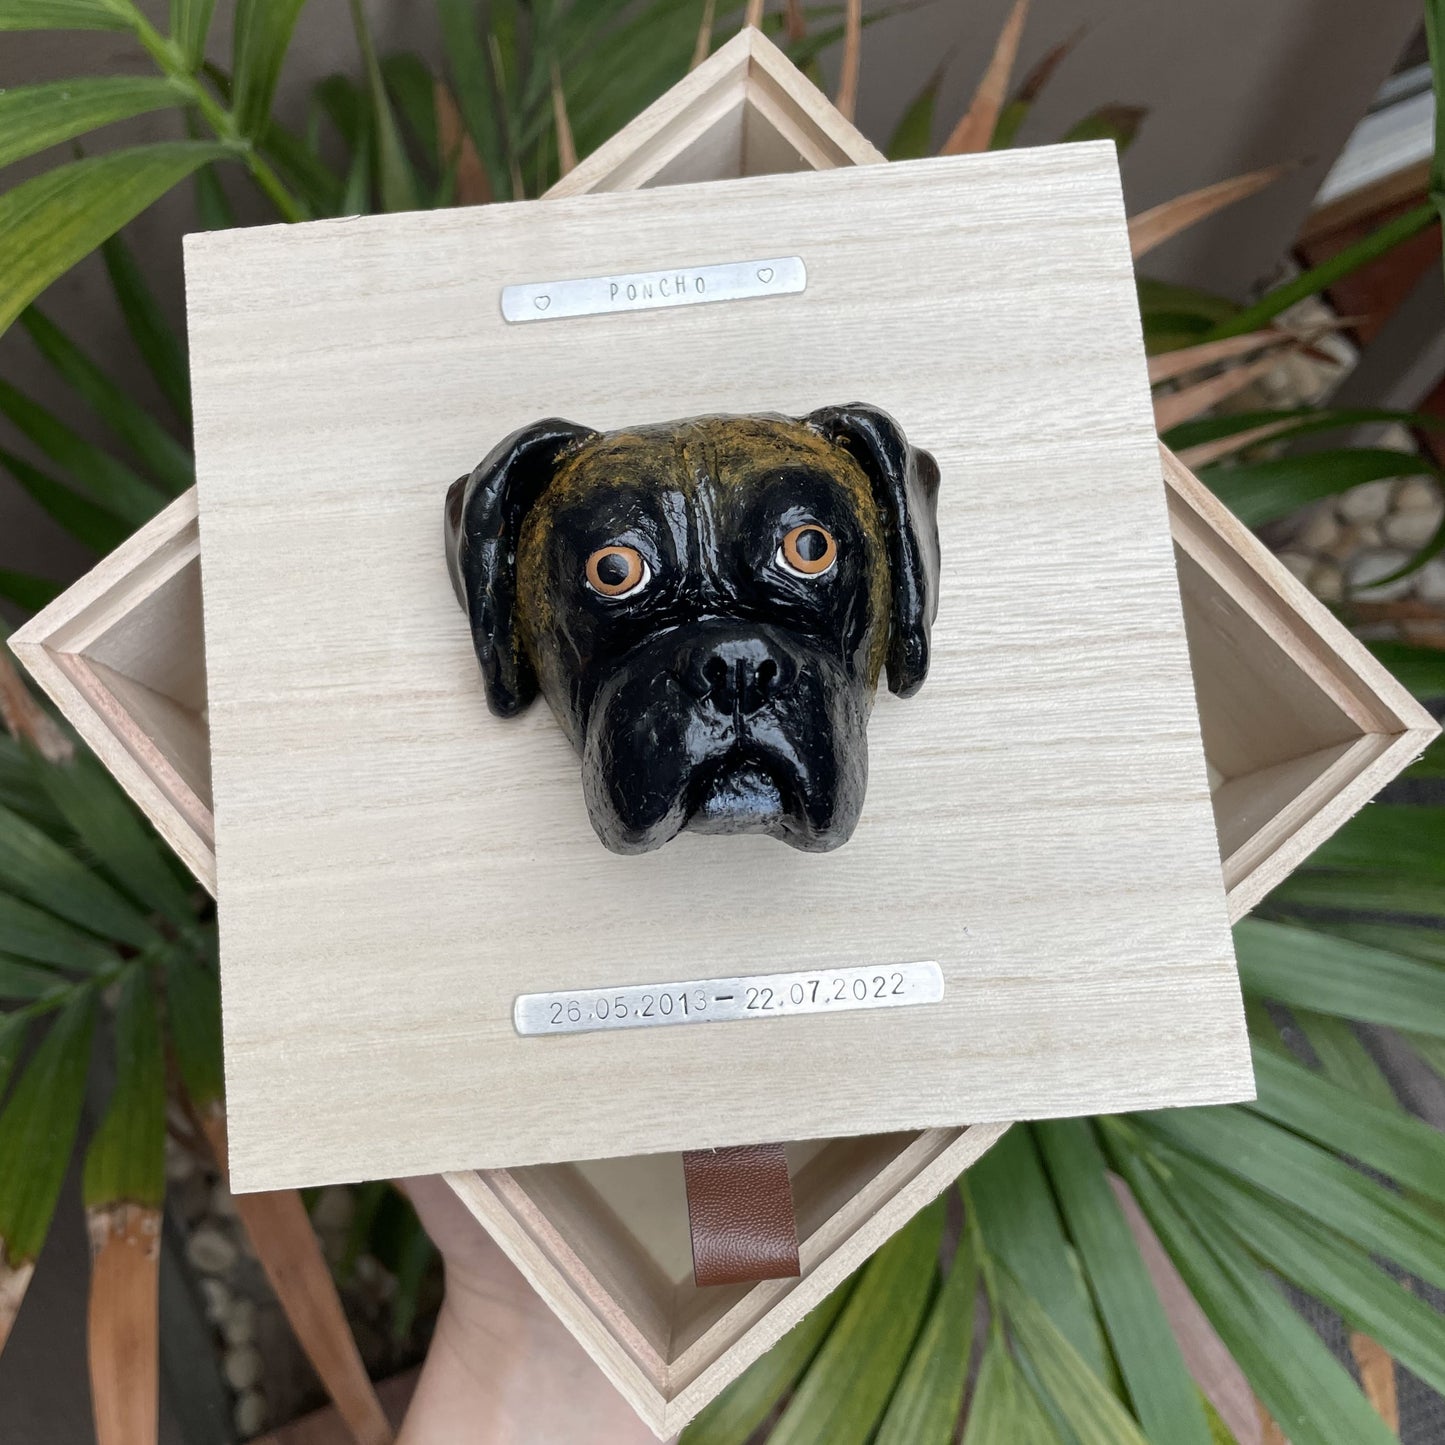 Custom timber pet memorial keepsake box with handscultped dog face on the lid, with a name plaque reading Poncho, being held over a palm plant..